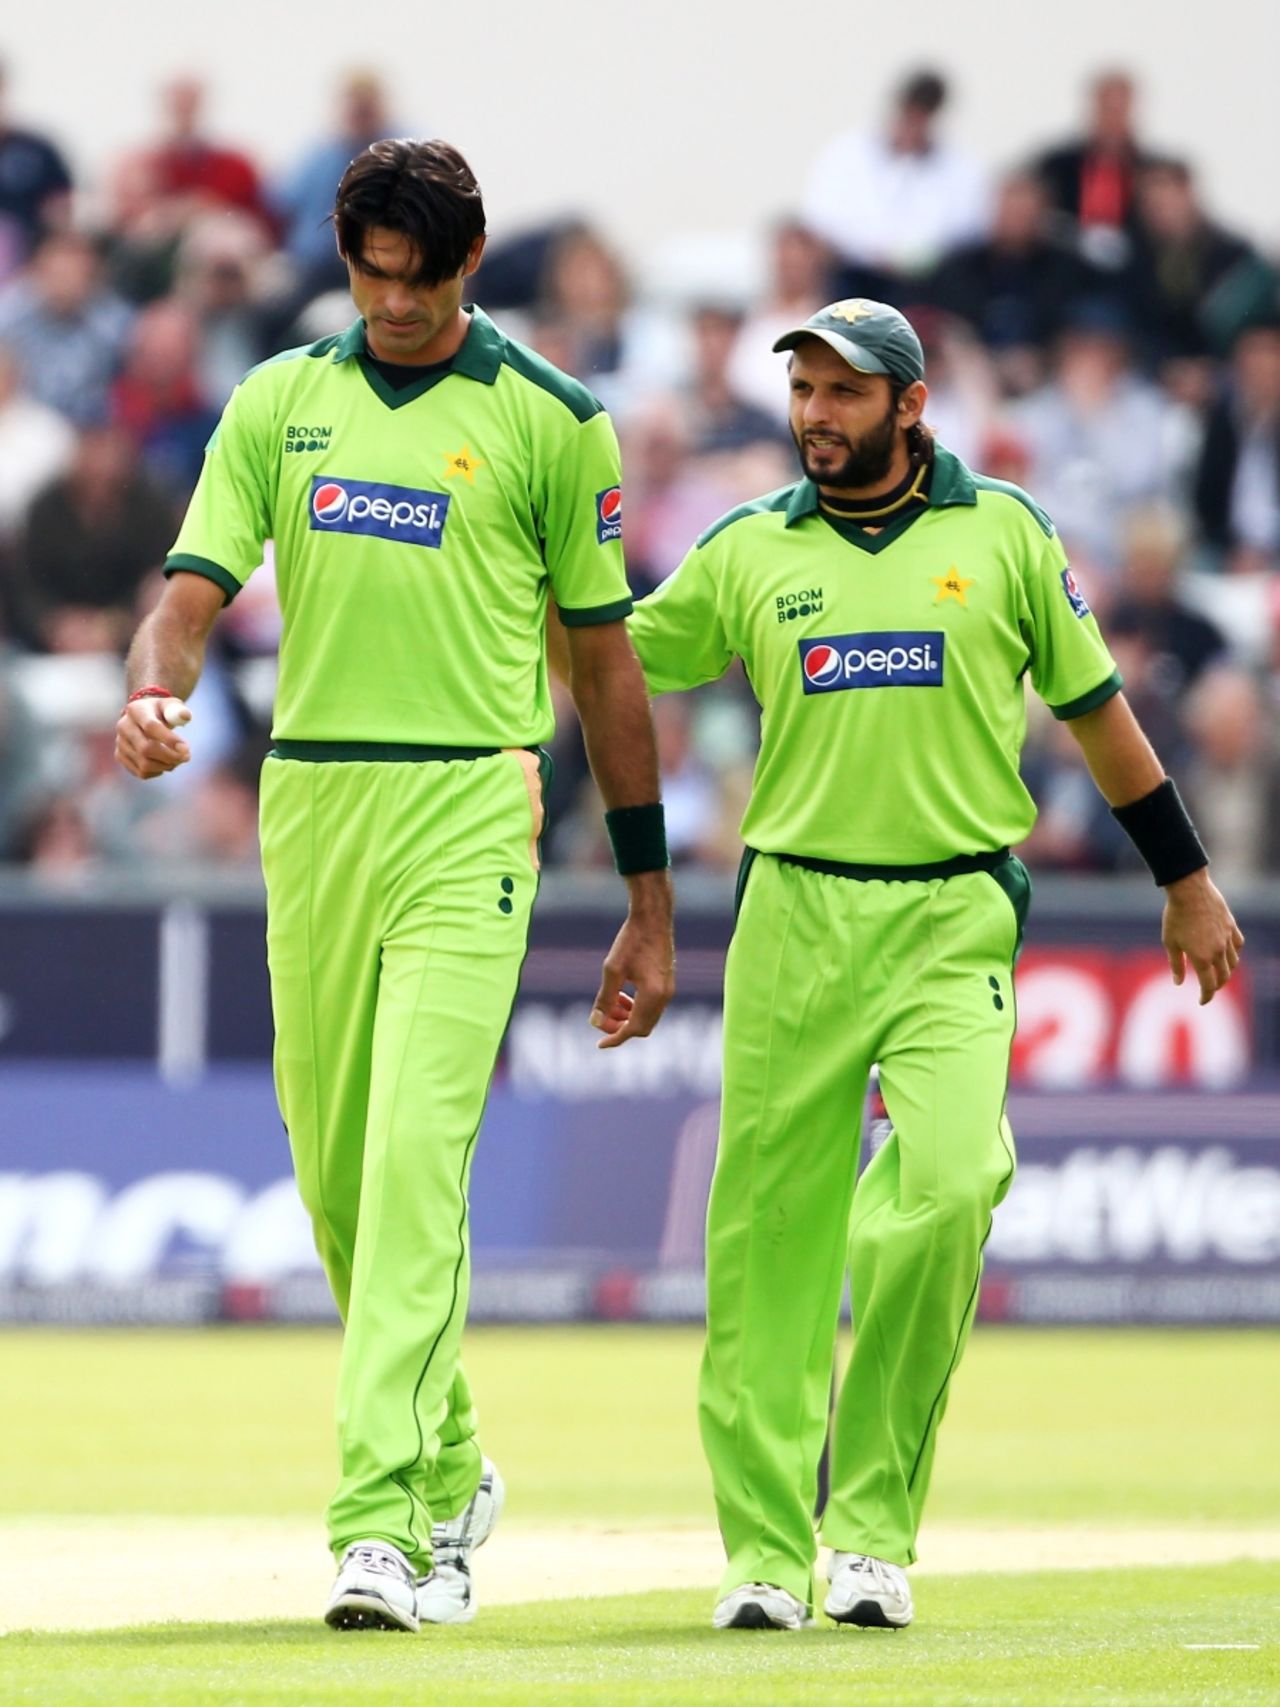 Shahid Afridi offers Mohammad Irfan some support during a nervous debut spell, England v Pakistan, 1st ODI, Chester-le-Street, September 10 2010 